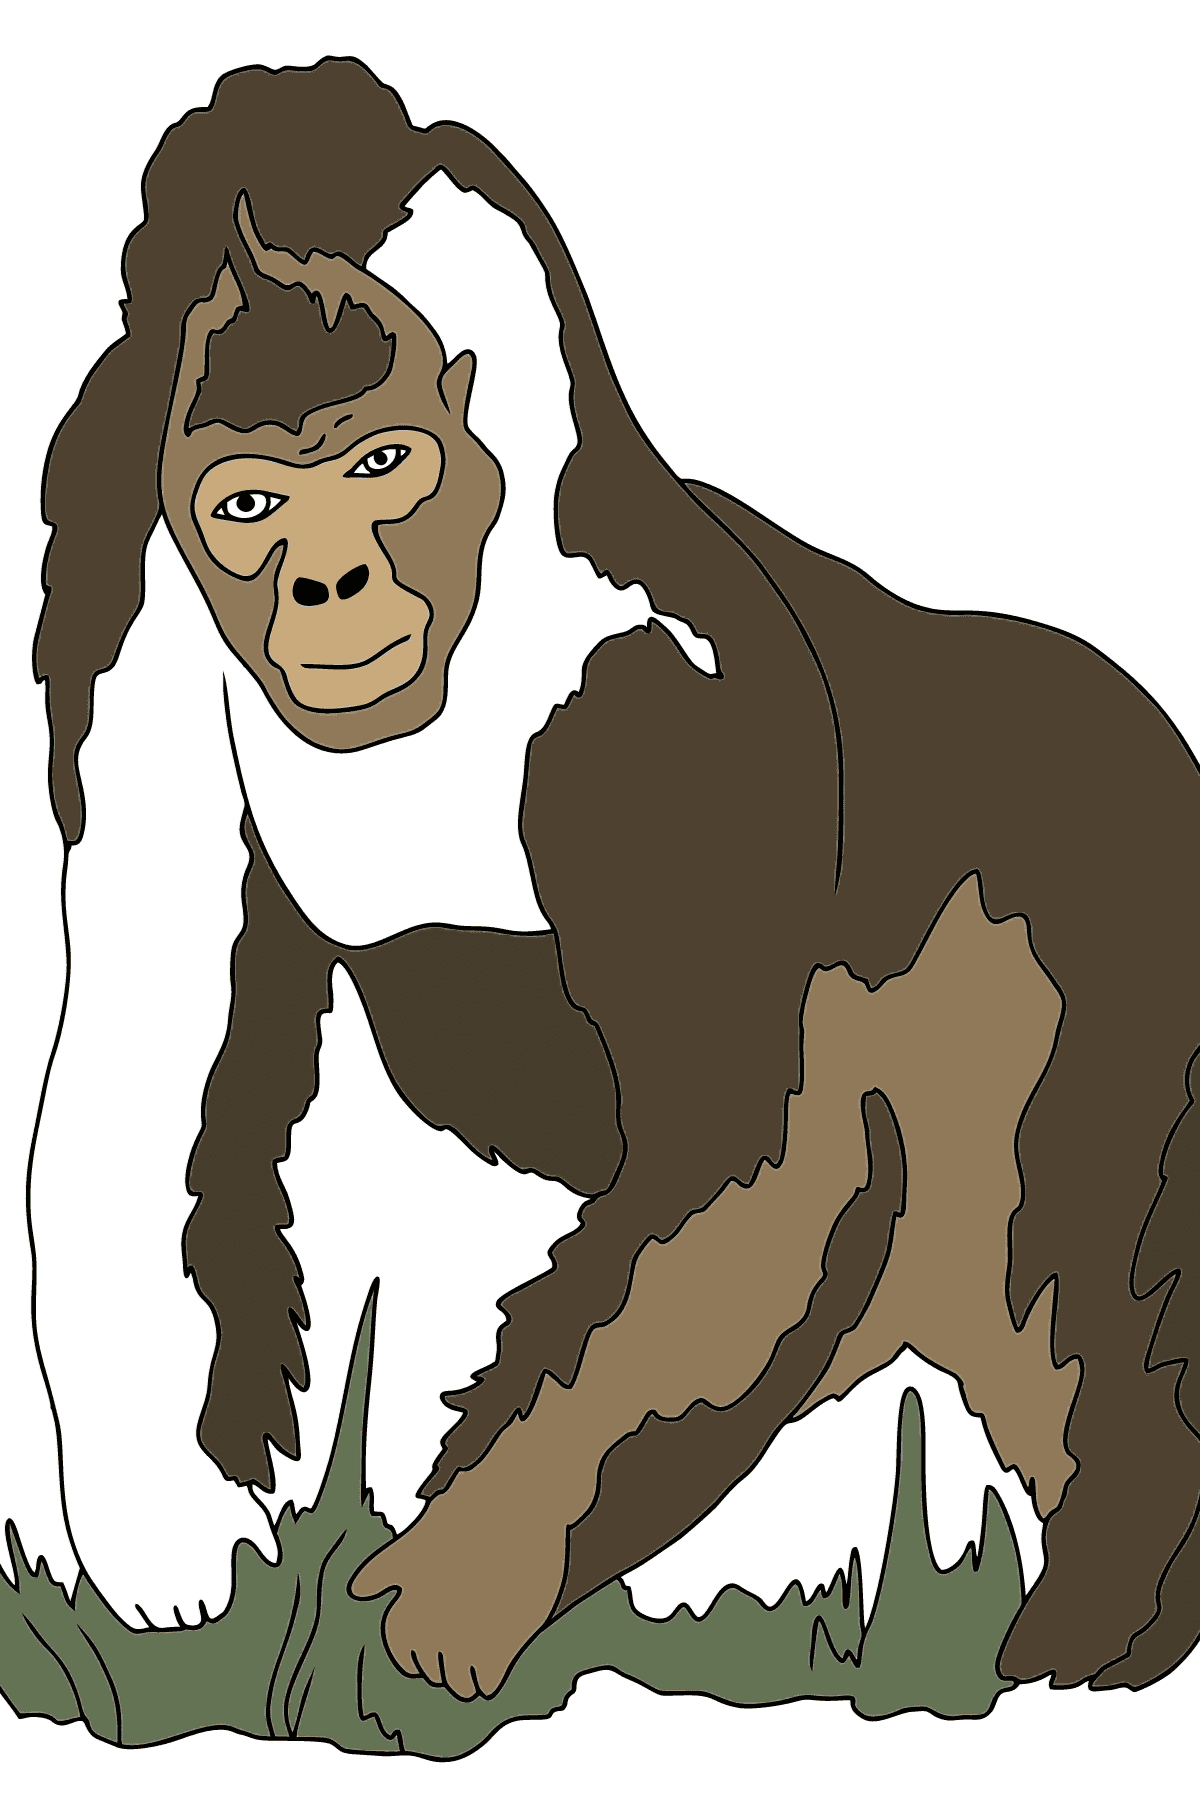 Coloring Page - A Real Gorilla - Coloring Pages for Children